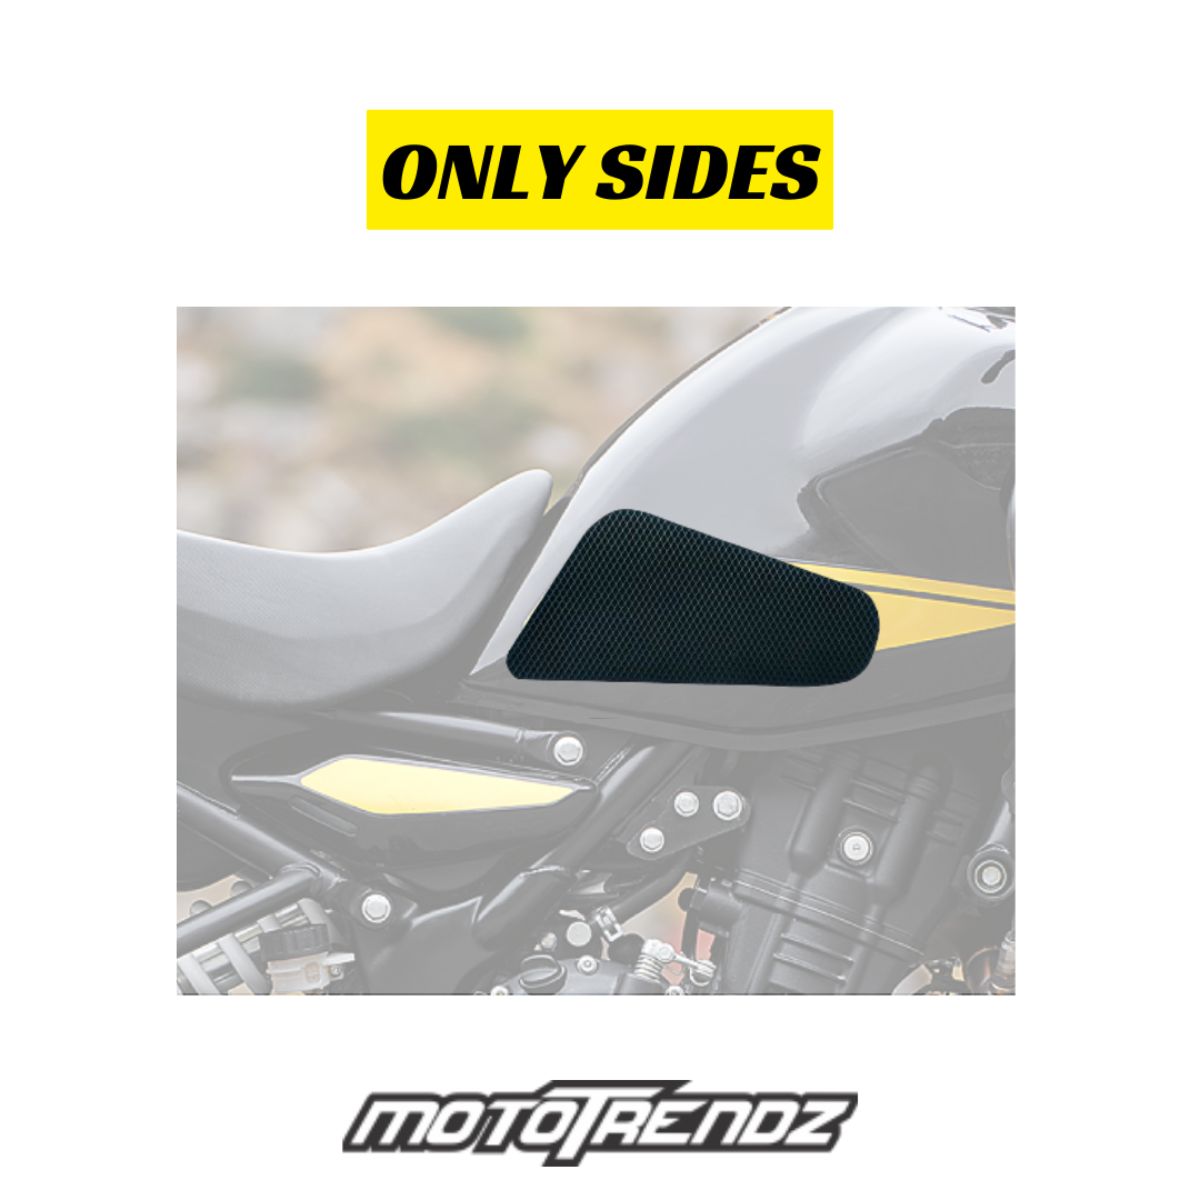 Traction Pads for Royal Enfield Himalayan 450 - Generation 2 5